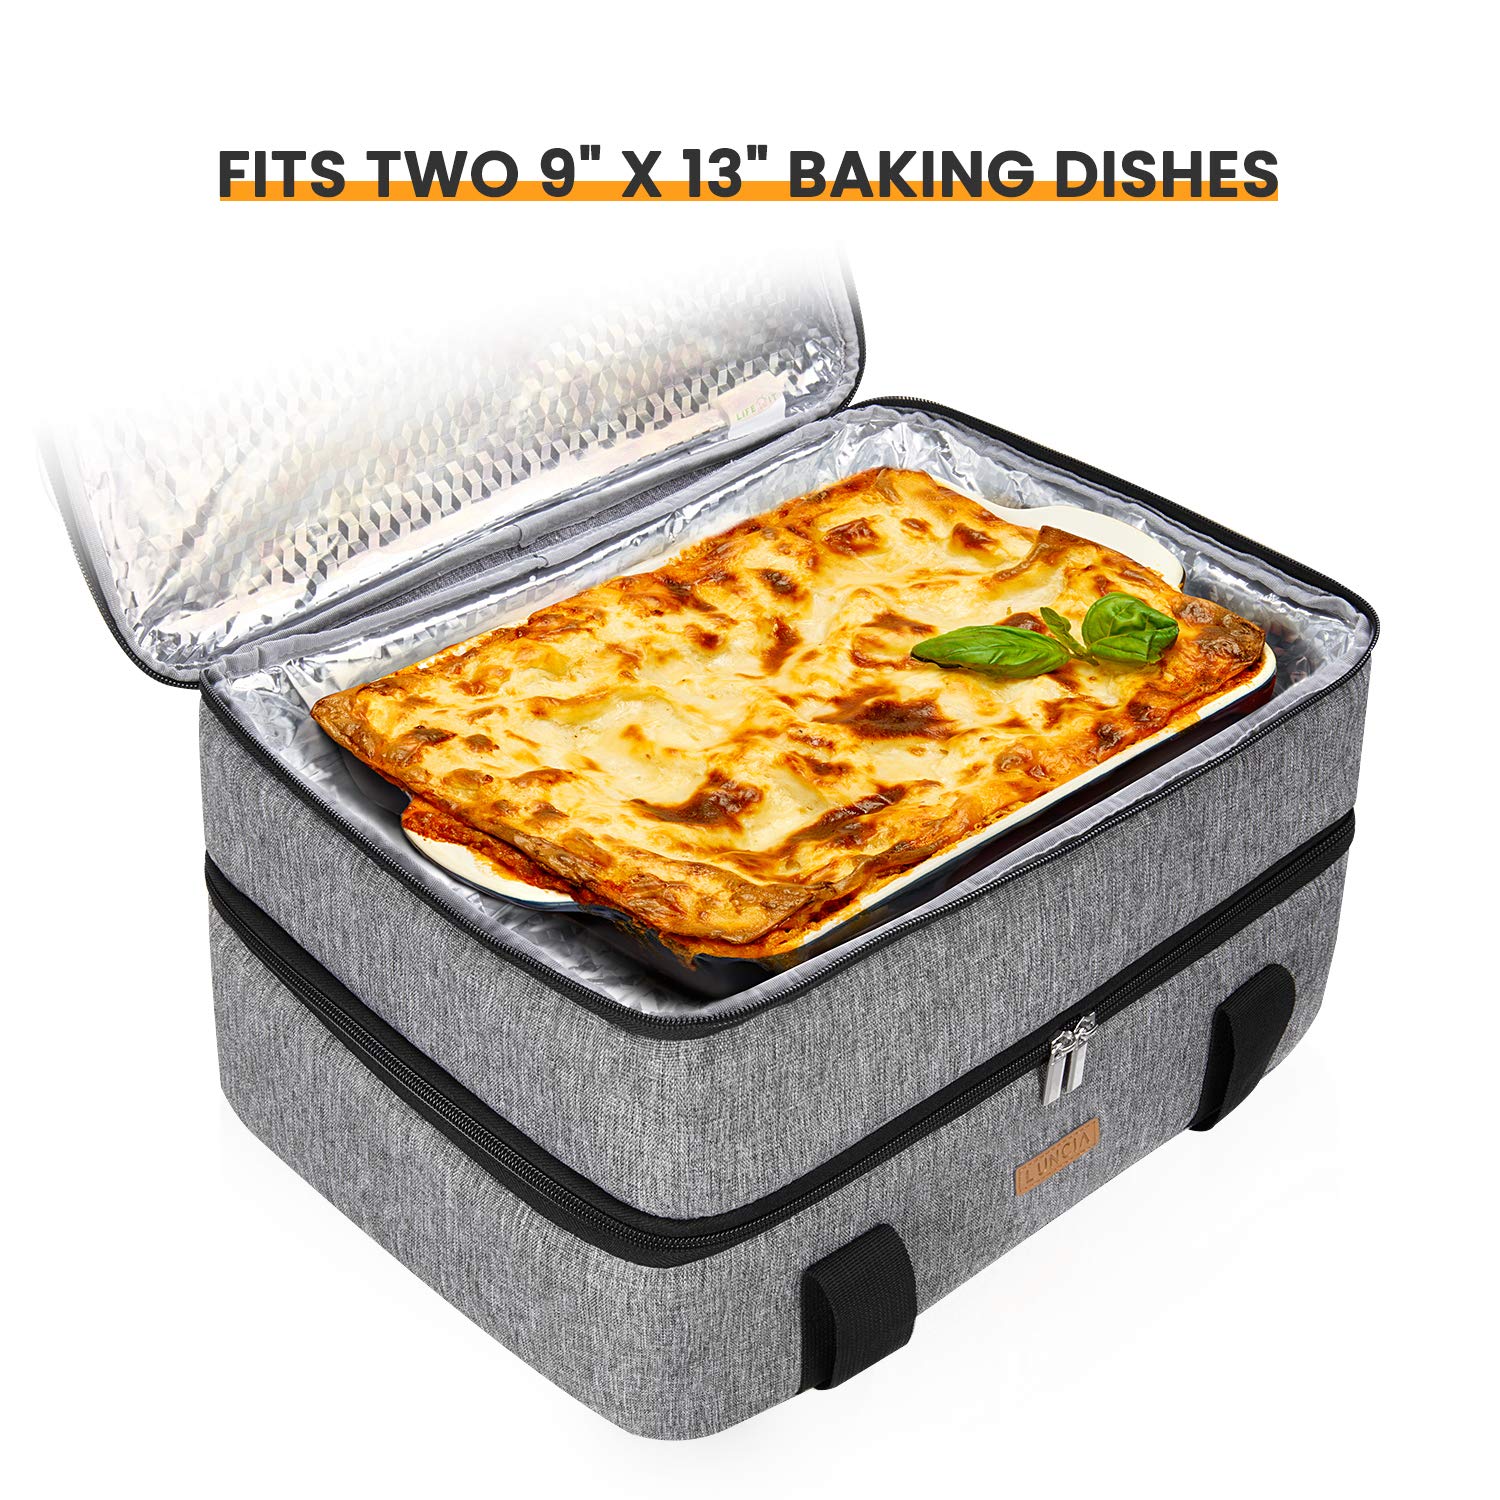 LUNCIA Double Decker Insulated Casserole Carrier for Hot or Cold Food, Lasagna Holder Tote for Potluck Parties/Picnic/Cookouts, Fits 9